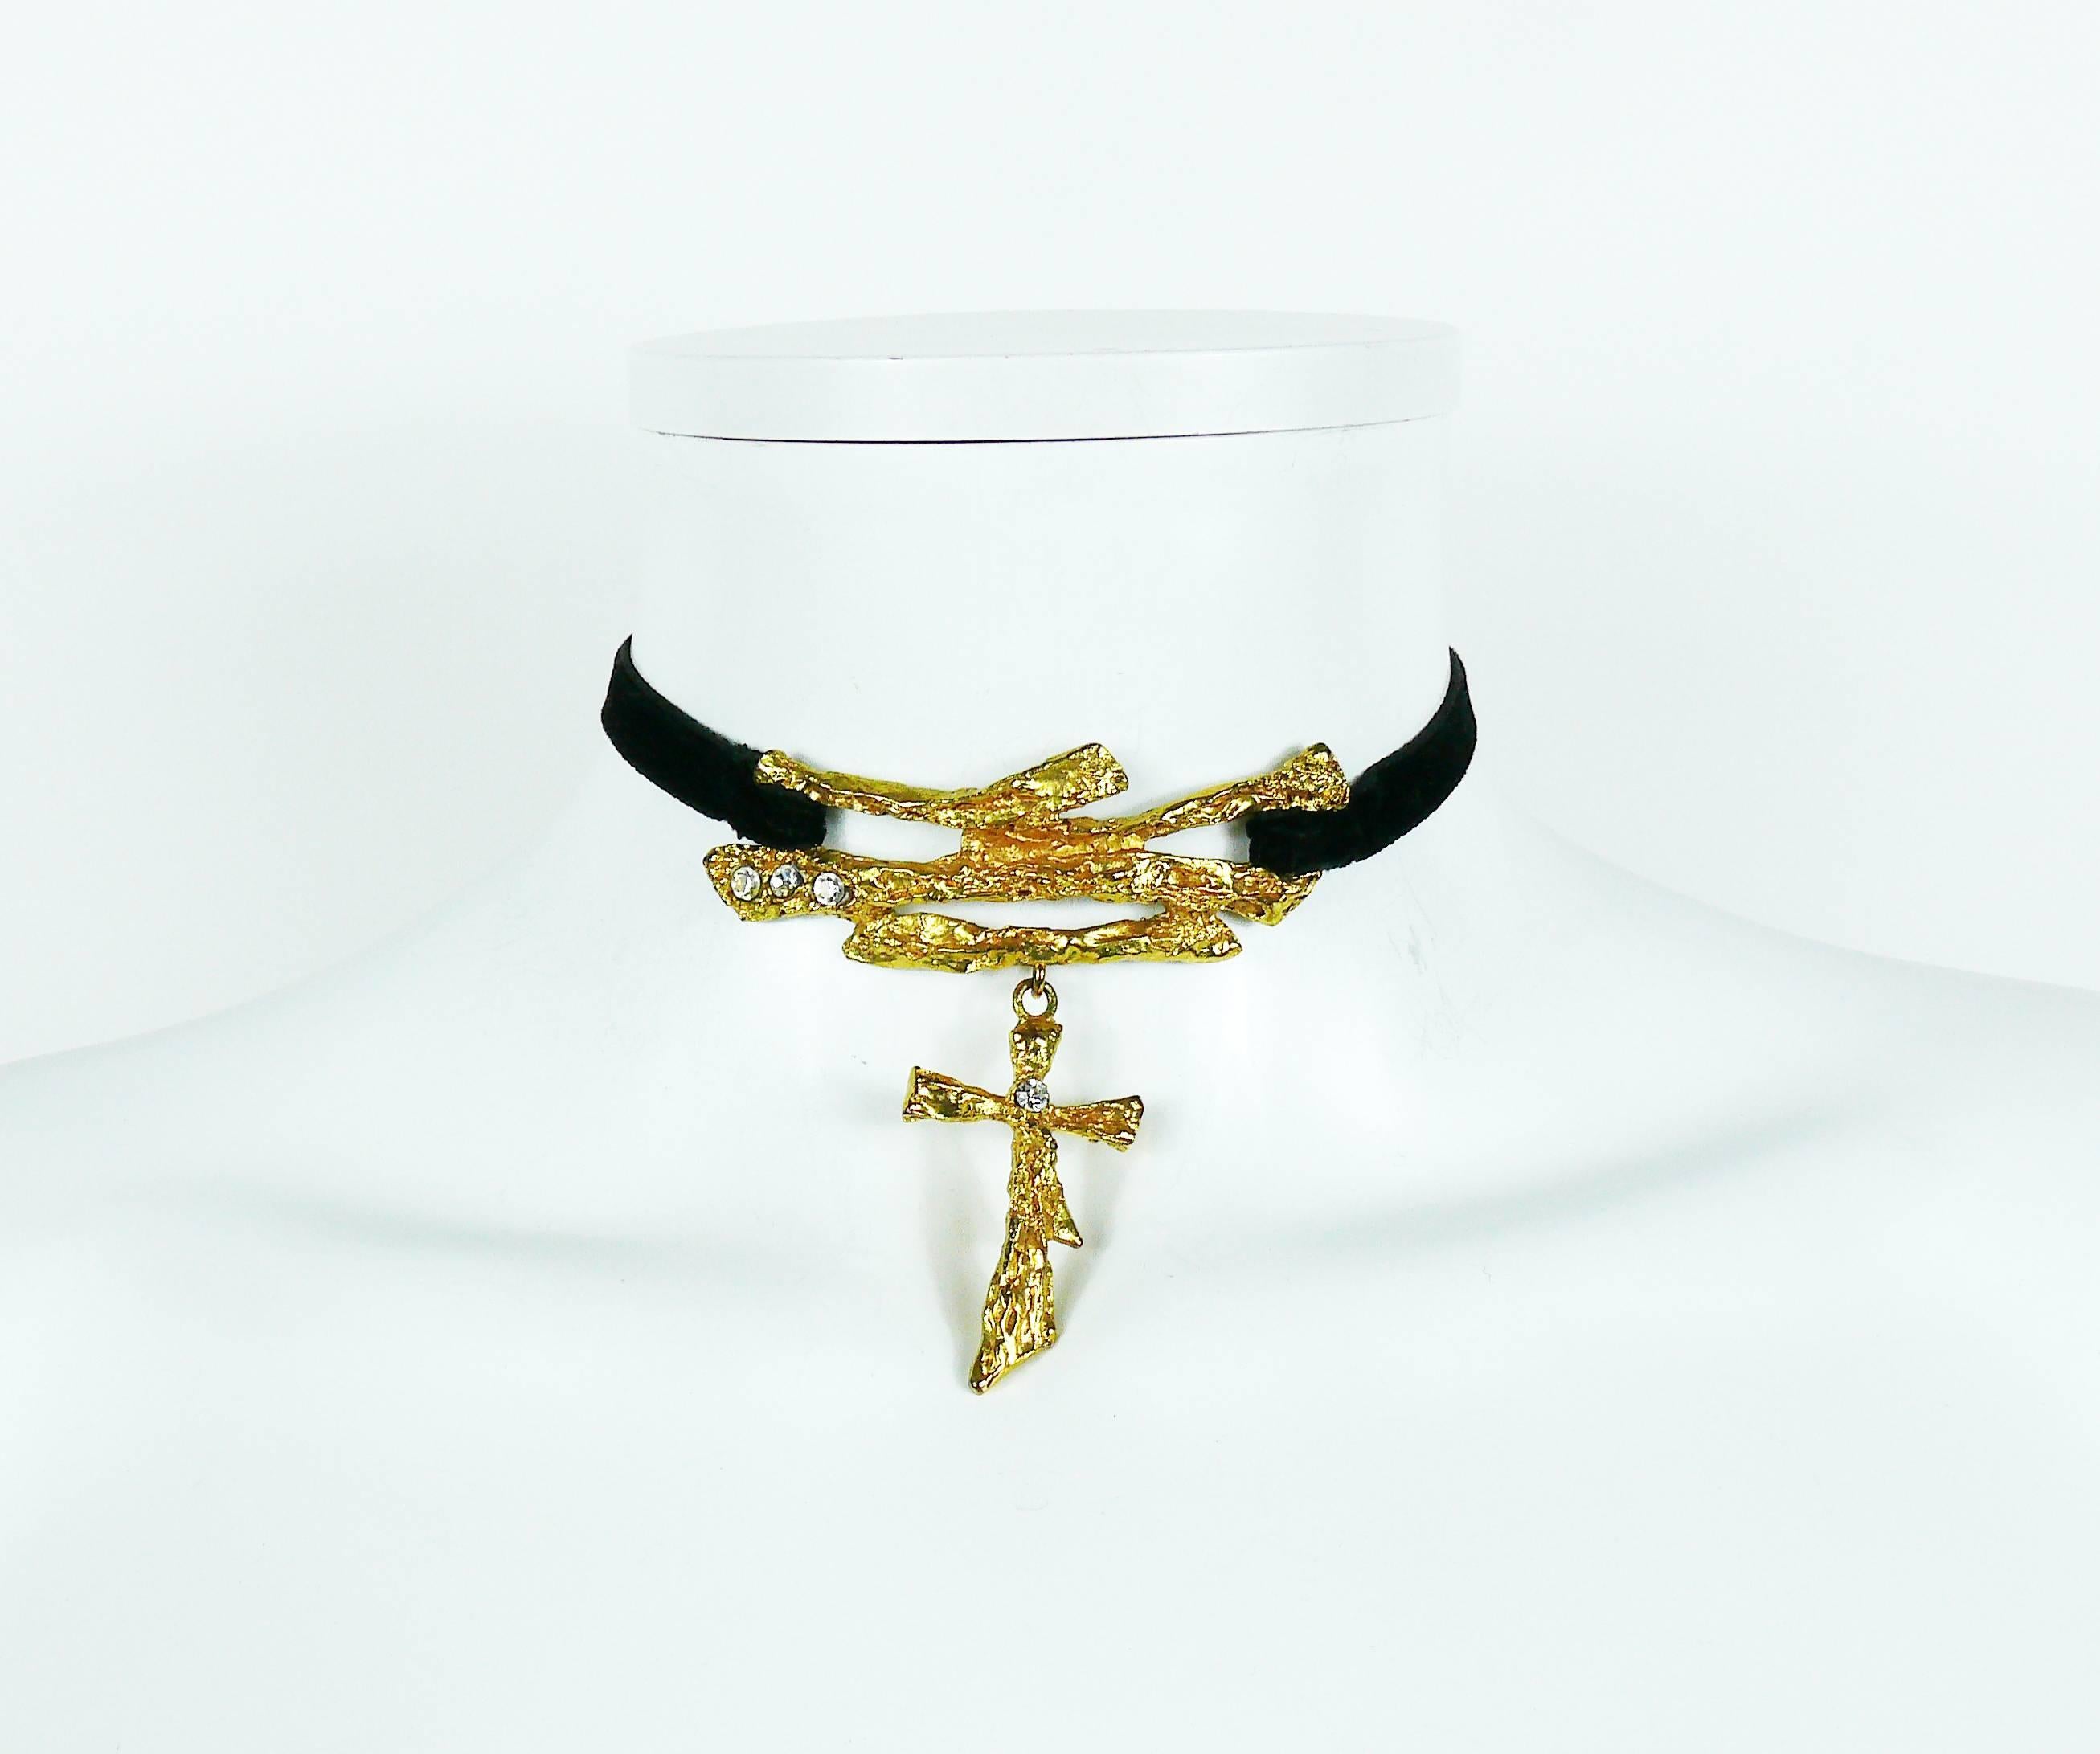 CHRISTIAN LACROIX vintage chocker necklace featuring a textured antiqued gold tone front detail and a cross pendant with clear crystal embellishement.

Black velvet ribbon that ties in the back.

Marked CHRISTIAN LACROIX CL Made in